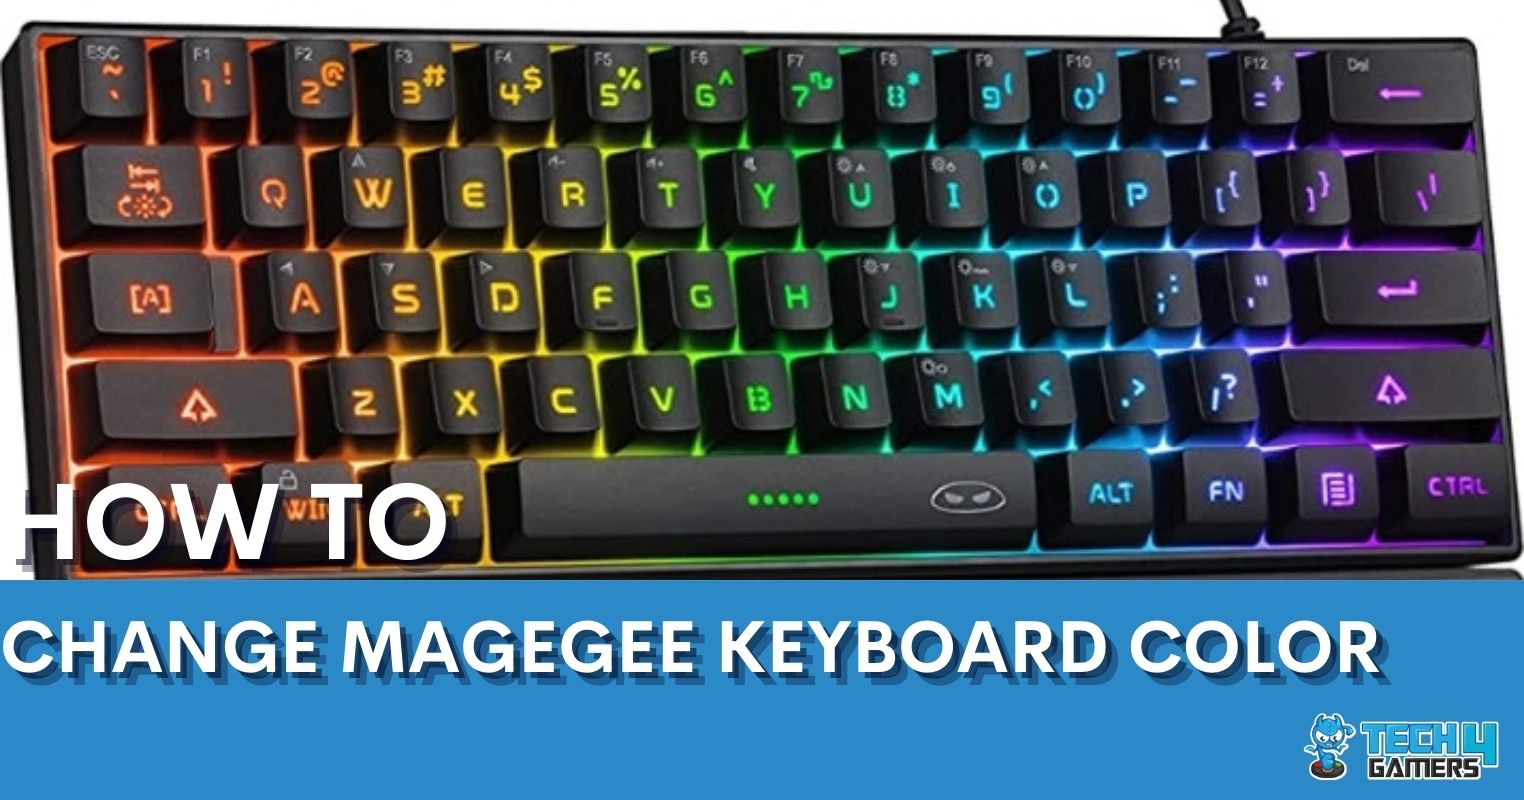 HOW TO CHANGE MAGEGEE KEYBOARD COLOR